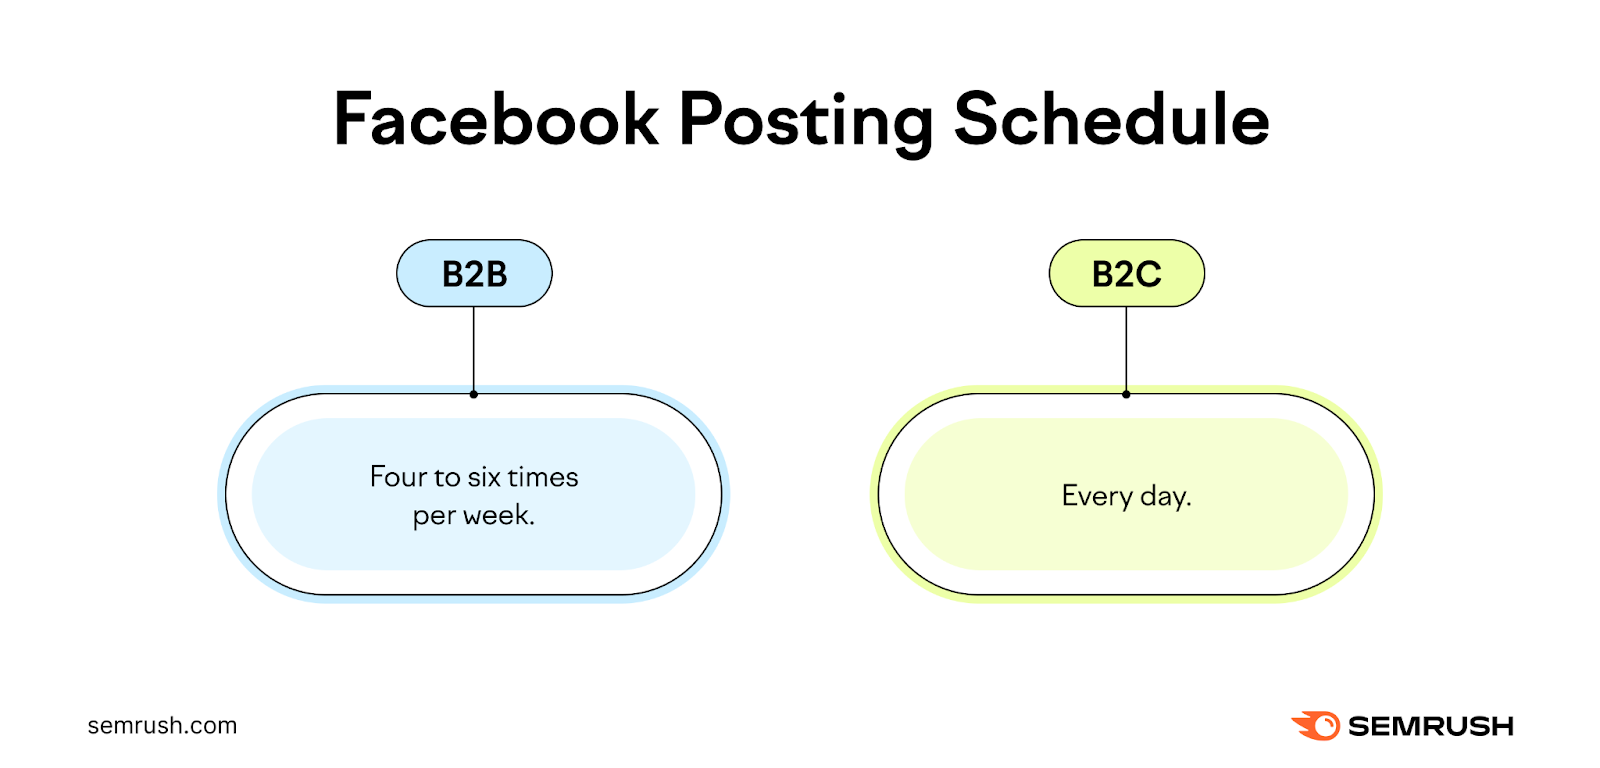 Facebook posting docket   recommendations (4-6 times a week for B2B and each   time  for B2C businesses)